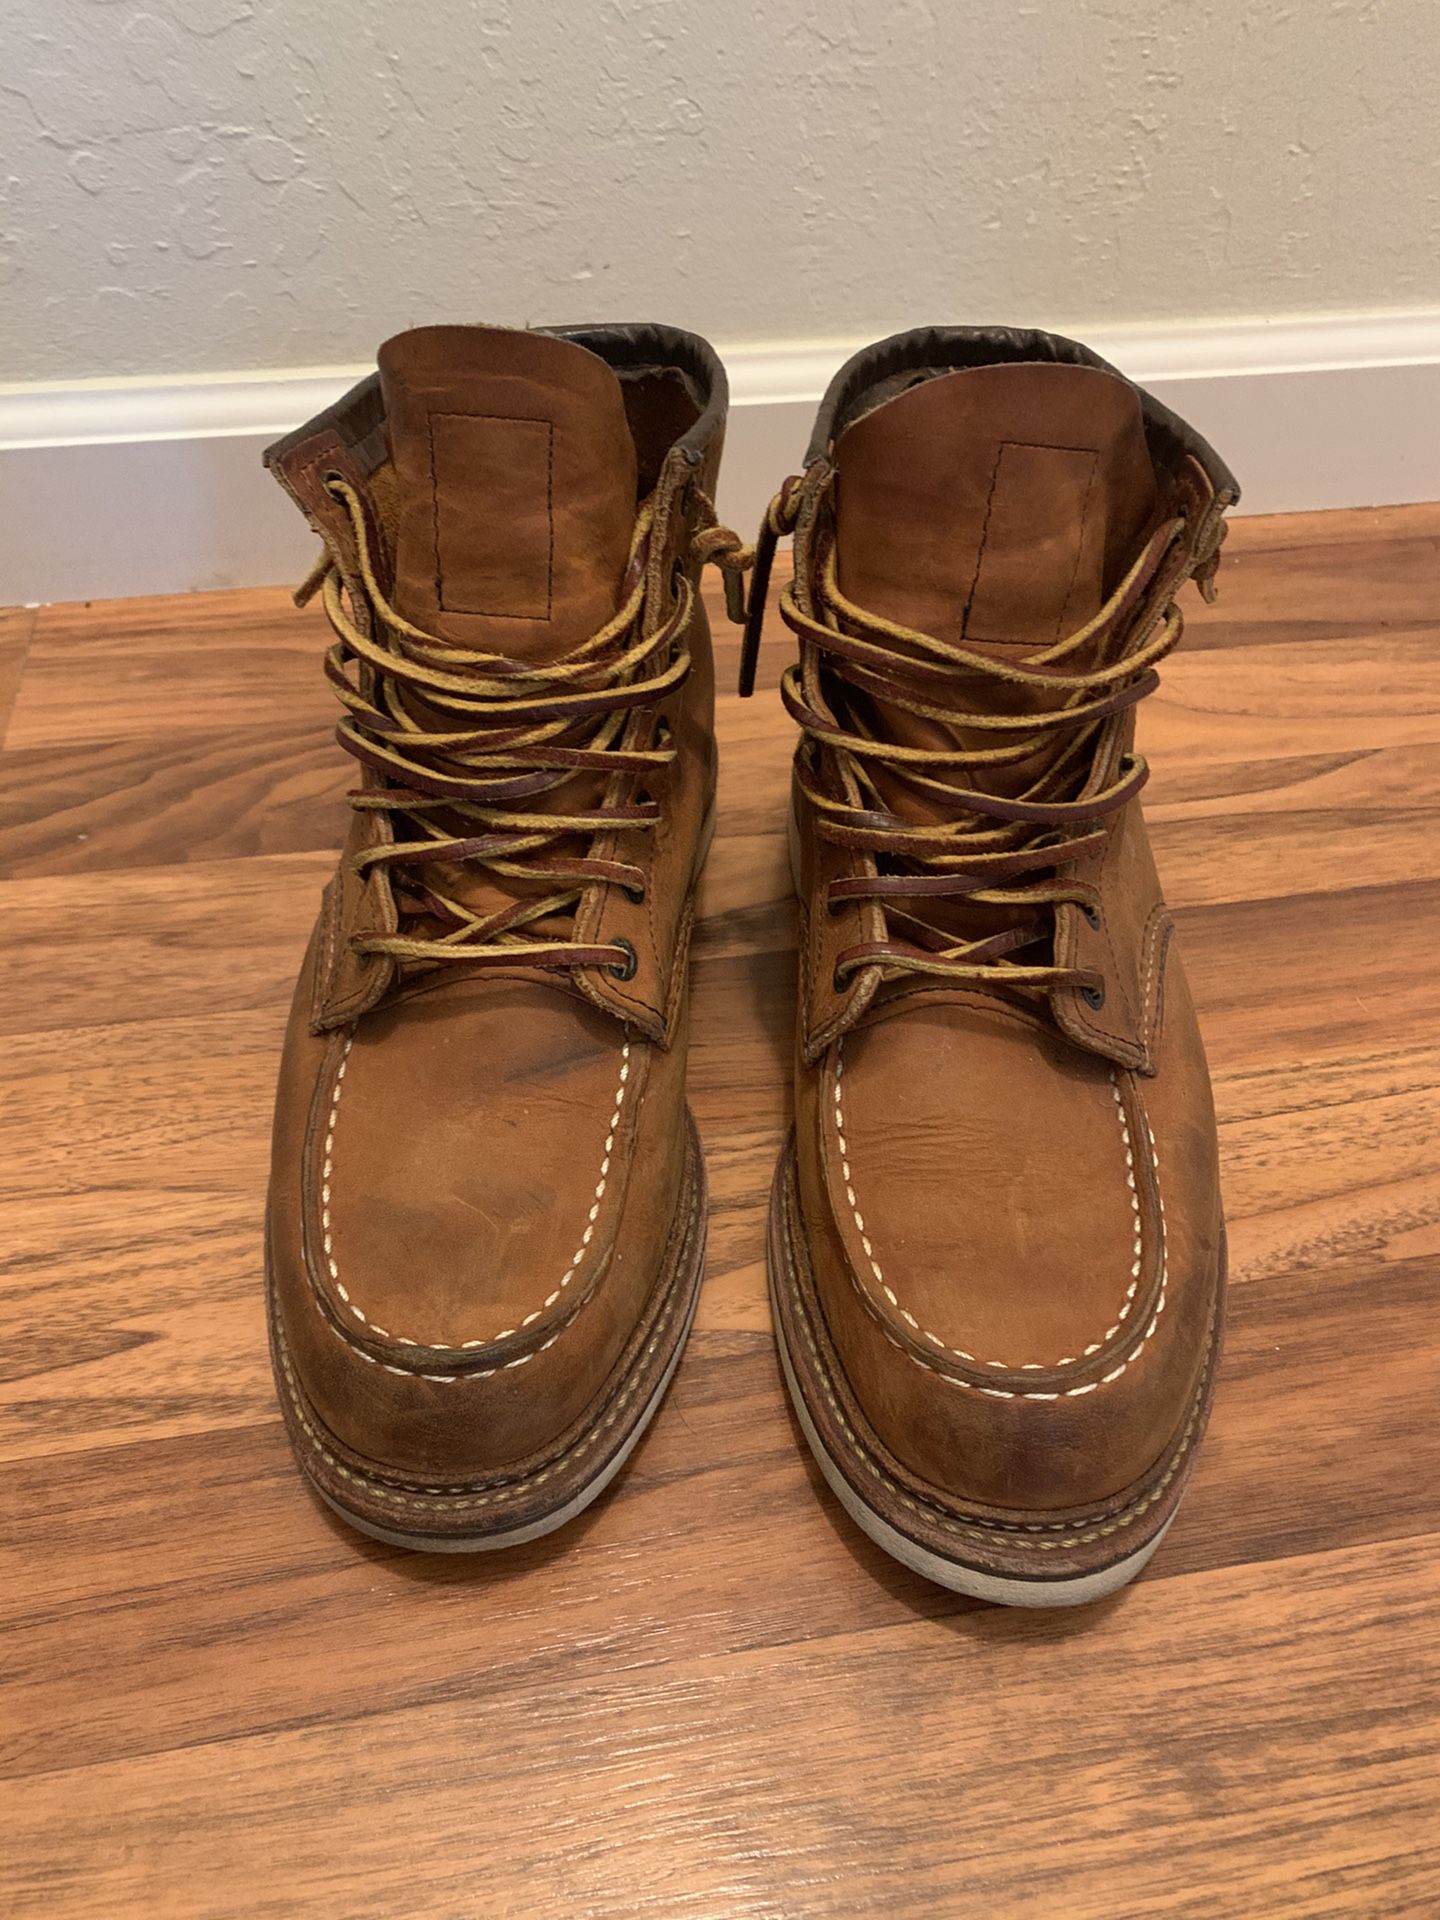 Red Wing shoes, work boots for men. Leather